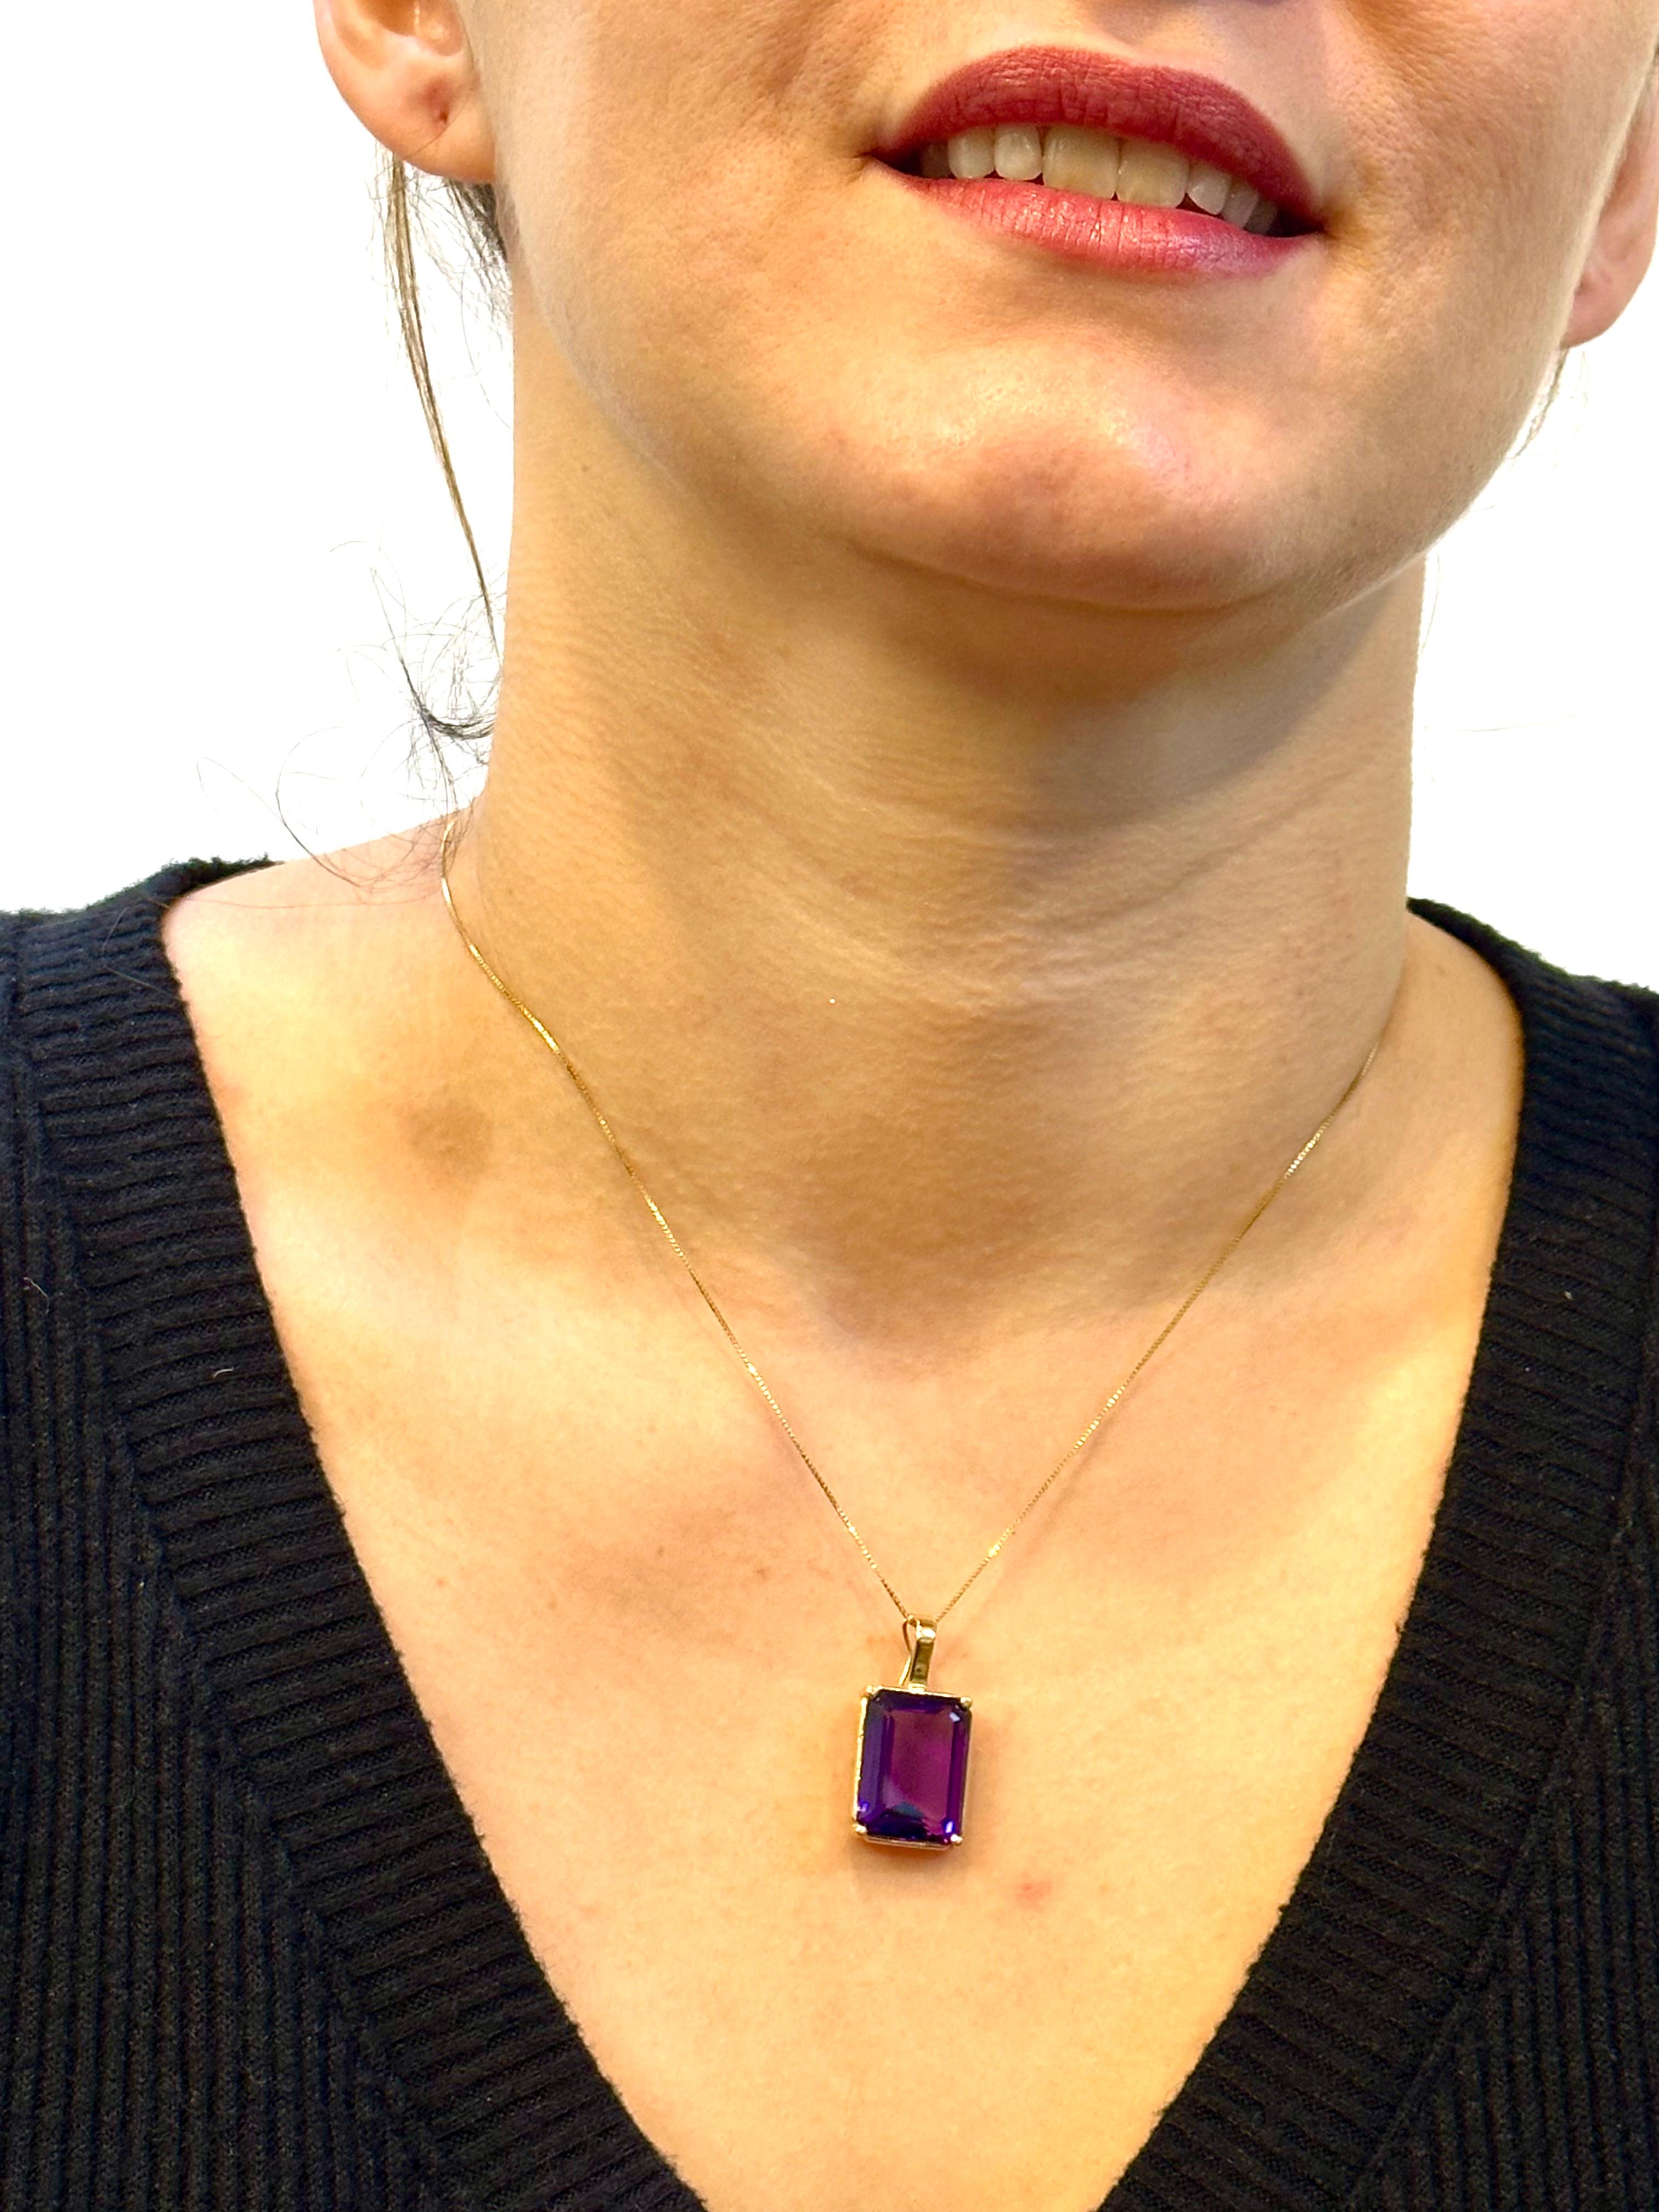 12 Ct Emerald Cut Amethyst Pendant /Necklace + 14 Kt Yellow Gold Chain Vintage For Sale 5